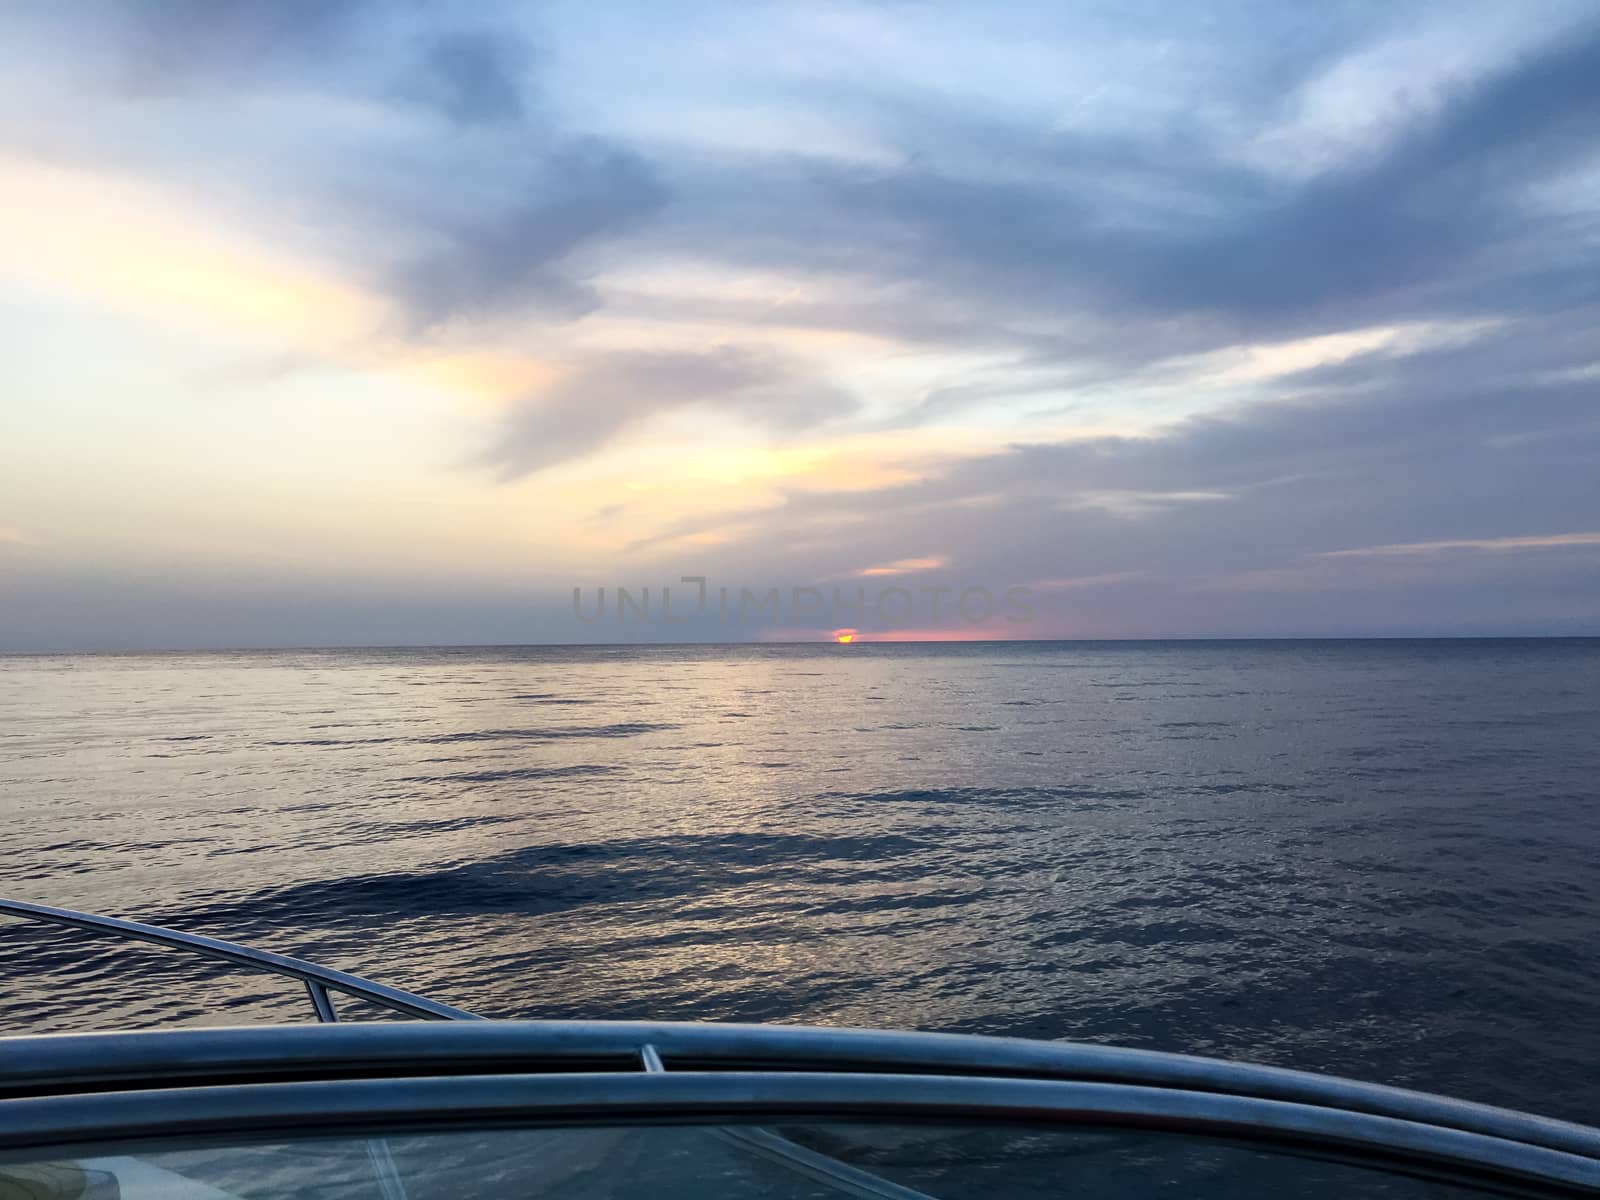 view from the boat to the sunset at the ocean by Tevion25